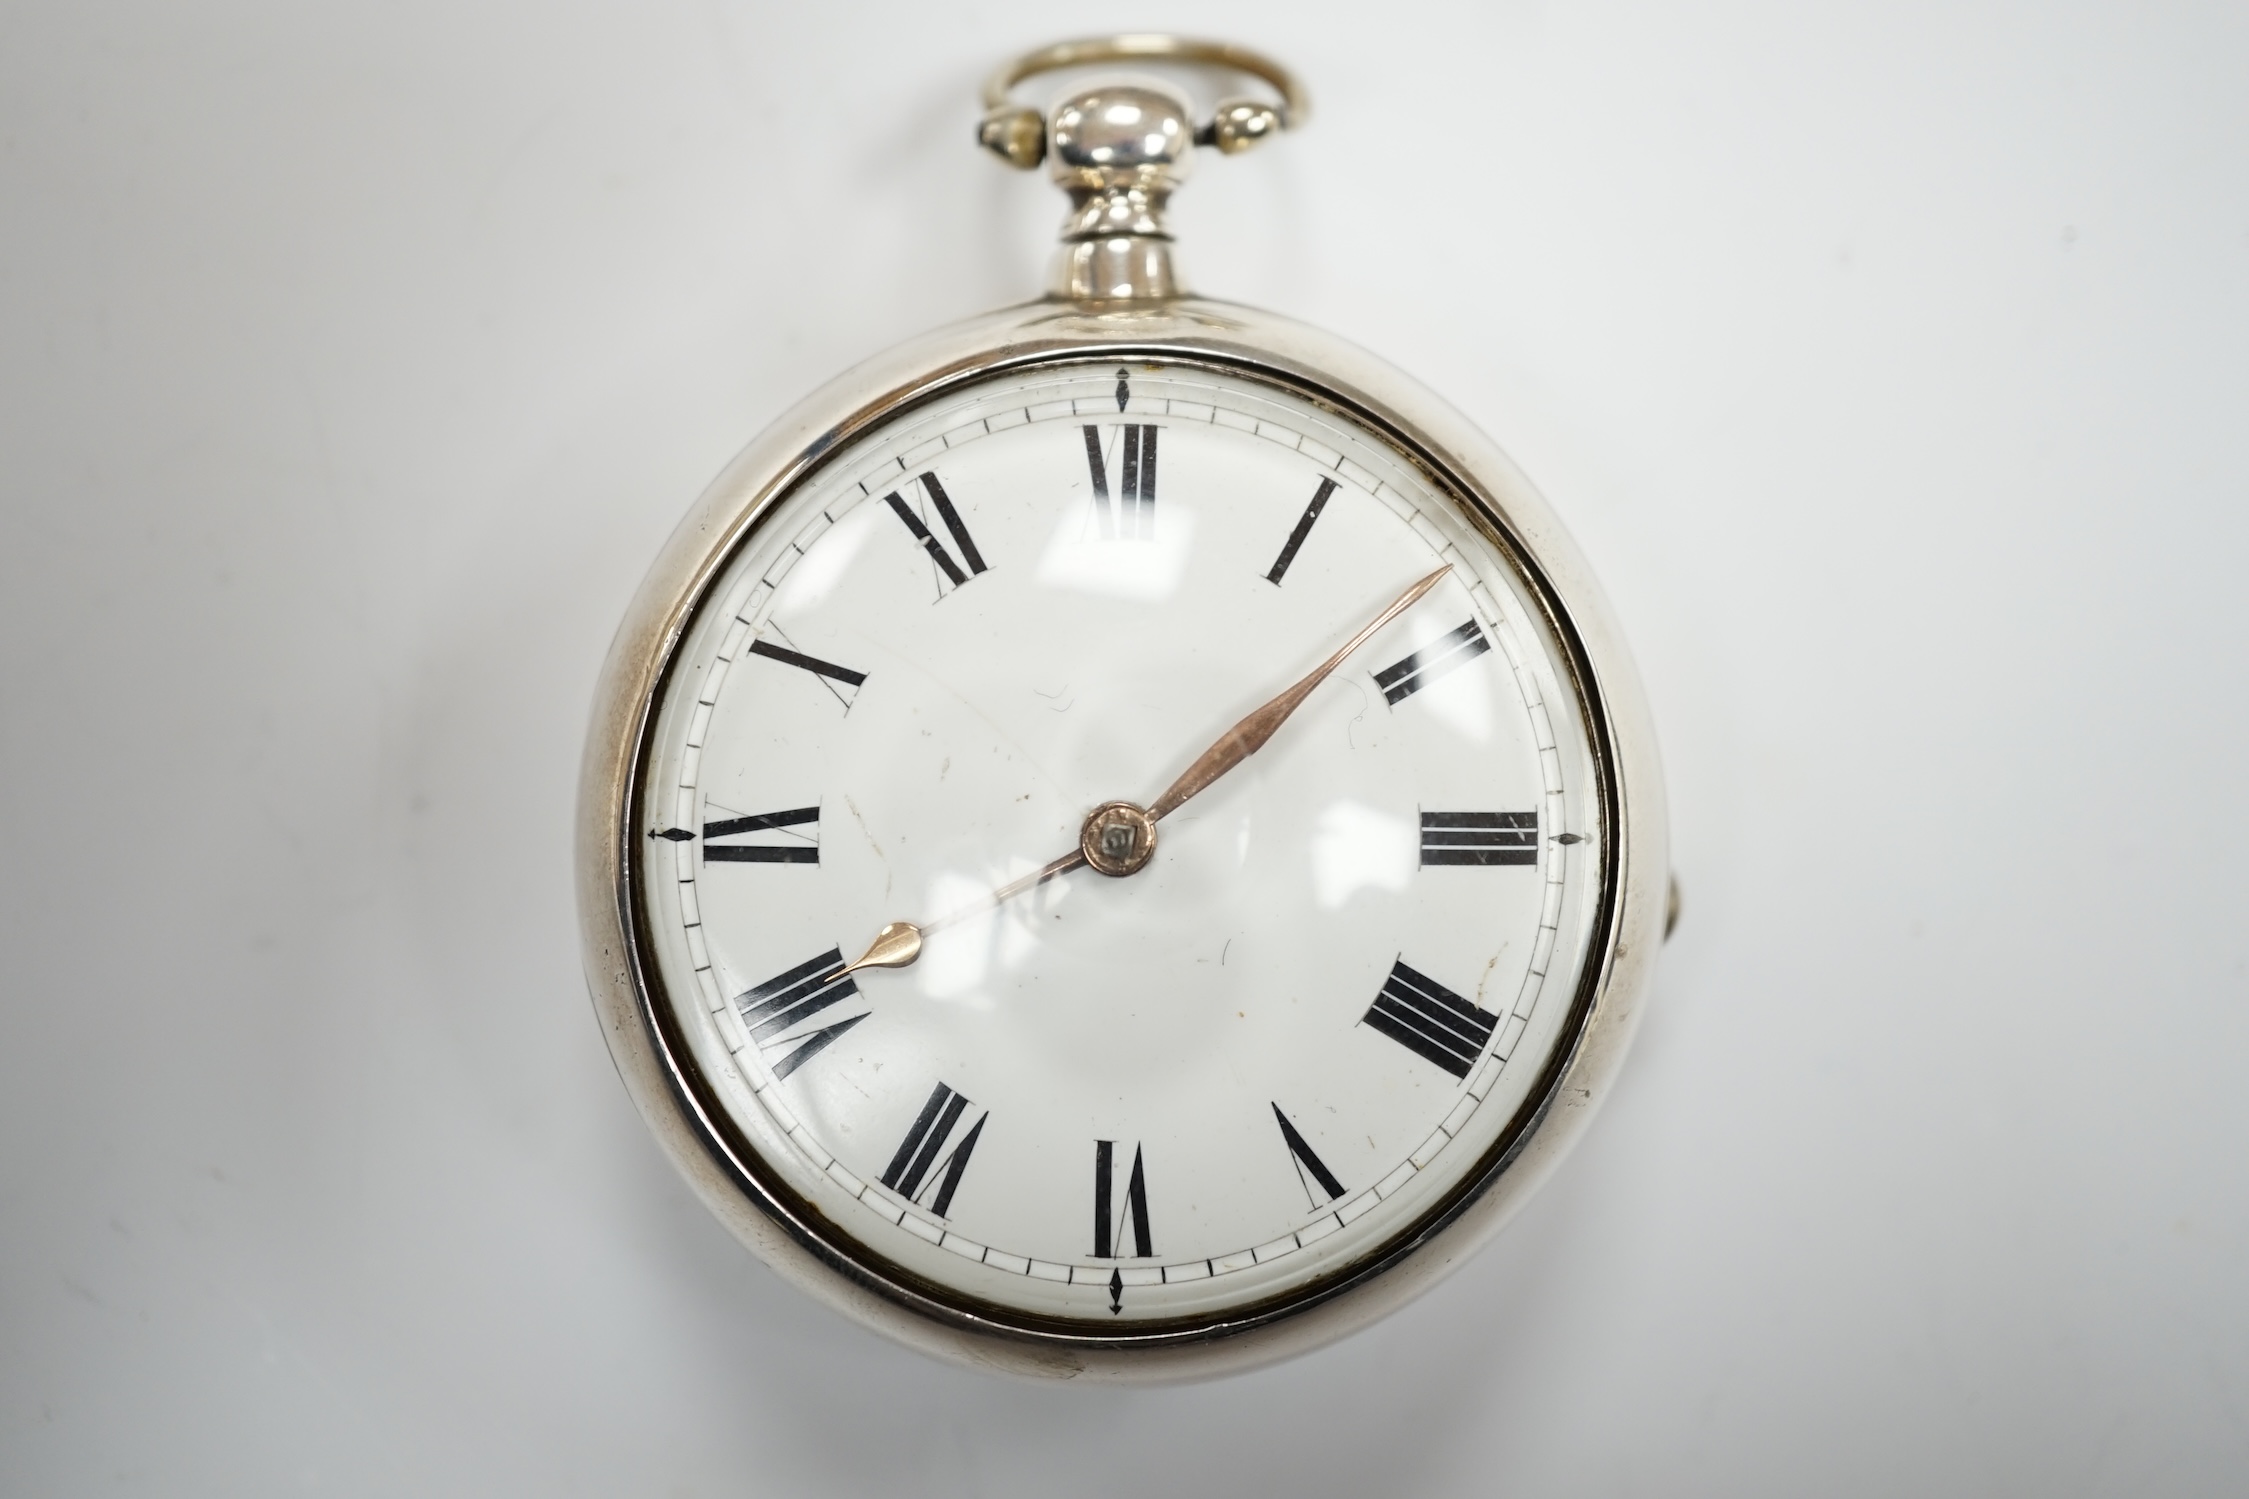 A George III silver pair cased keywind verge pocket watch, by W, Atwood of Lewes, with Roman dial and signed movement numbered 4644, outer case diameter 56mm.